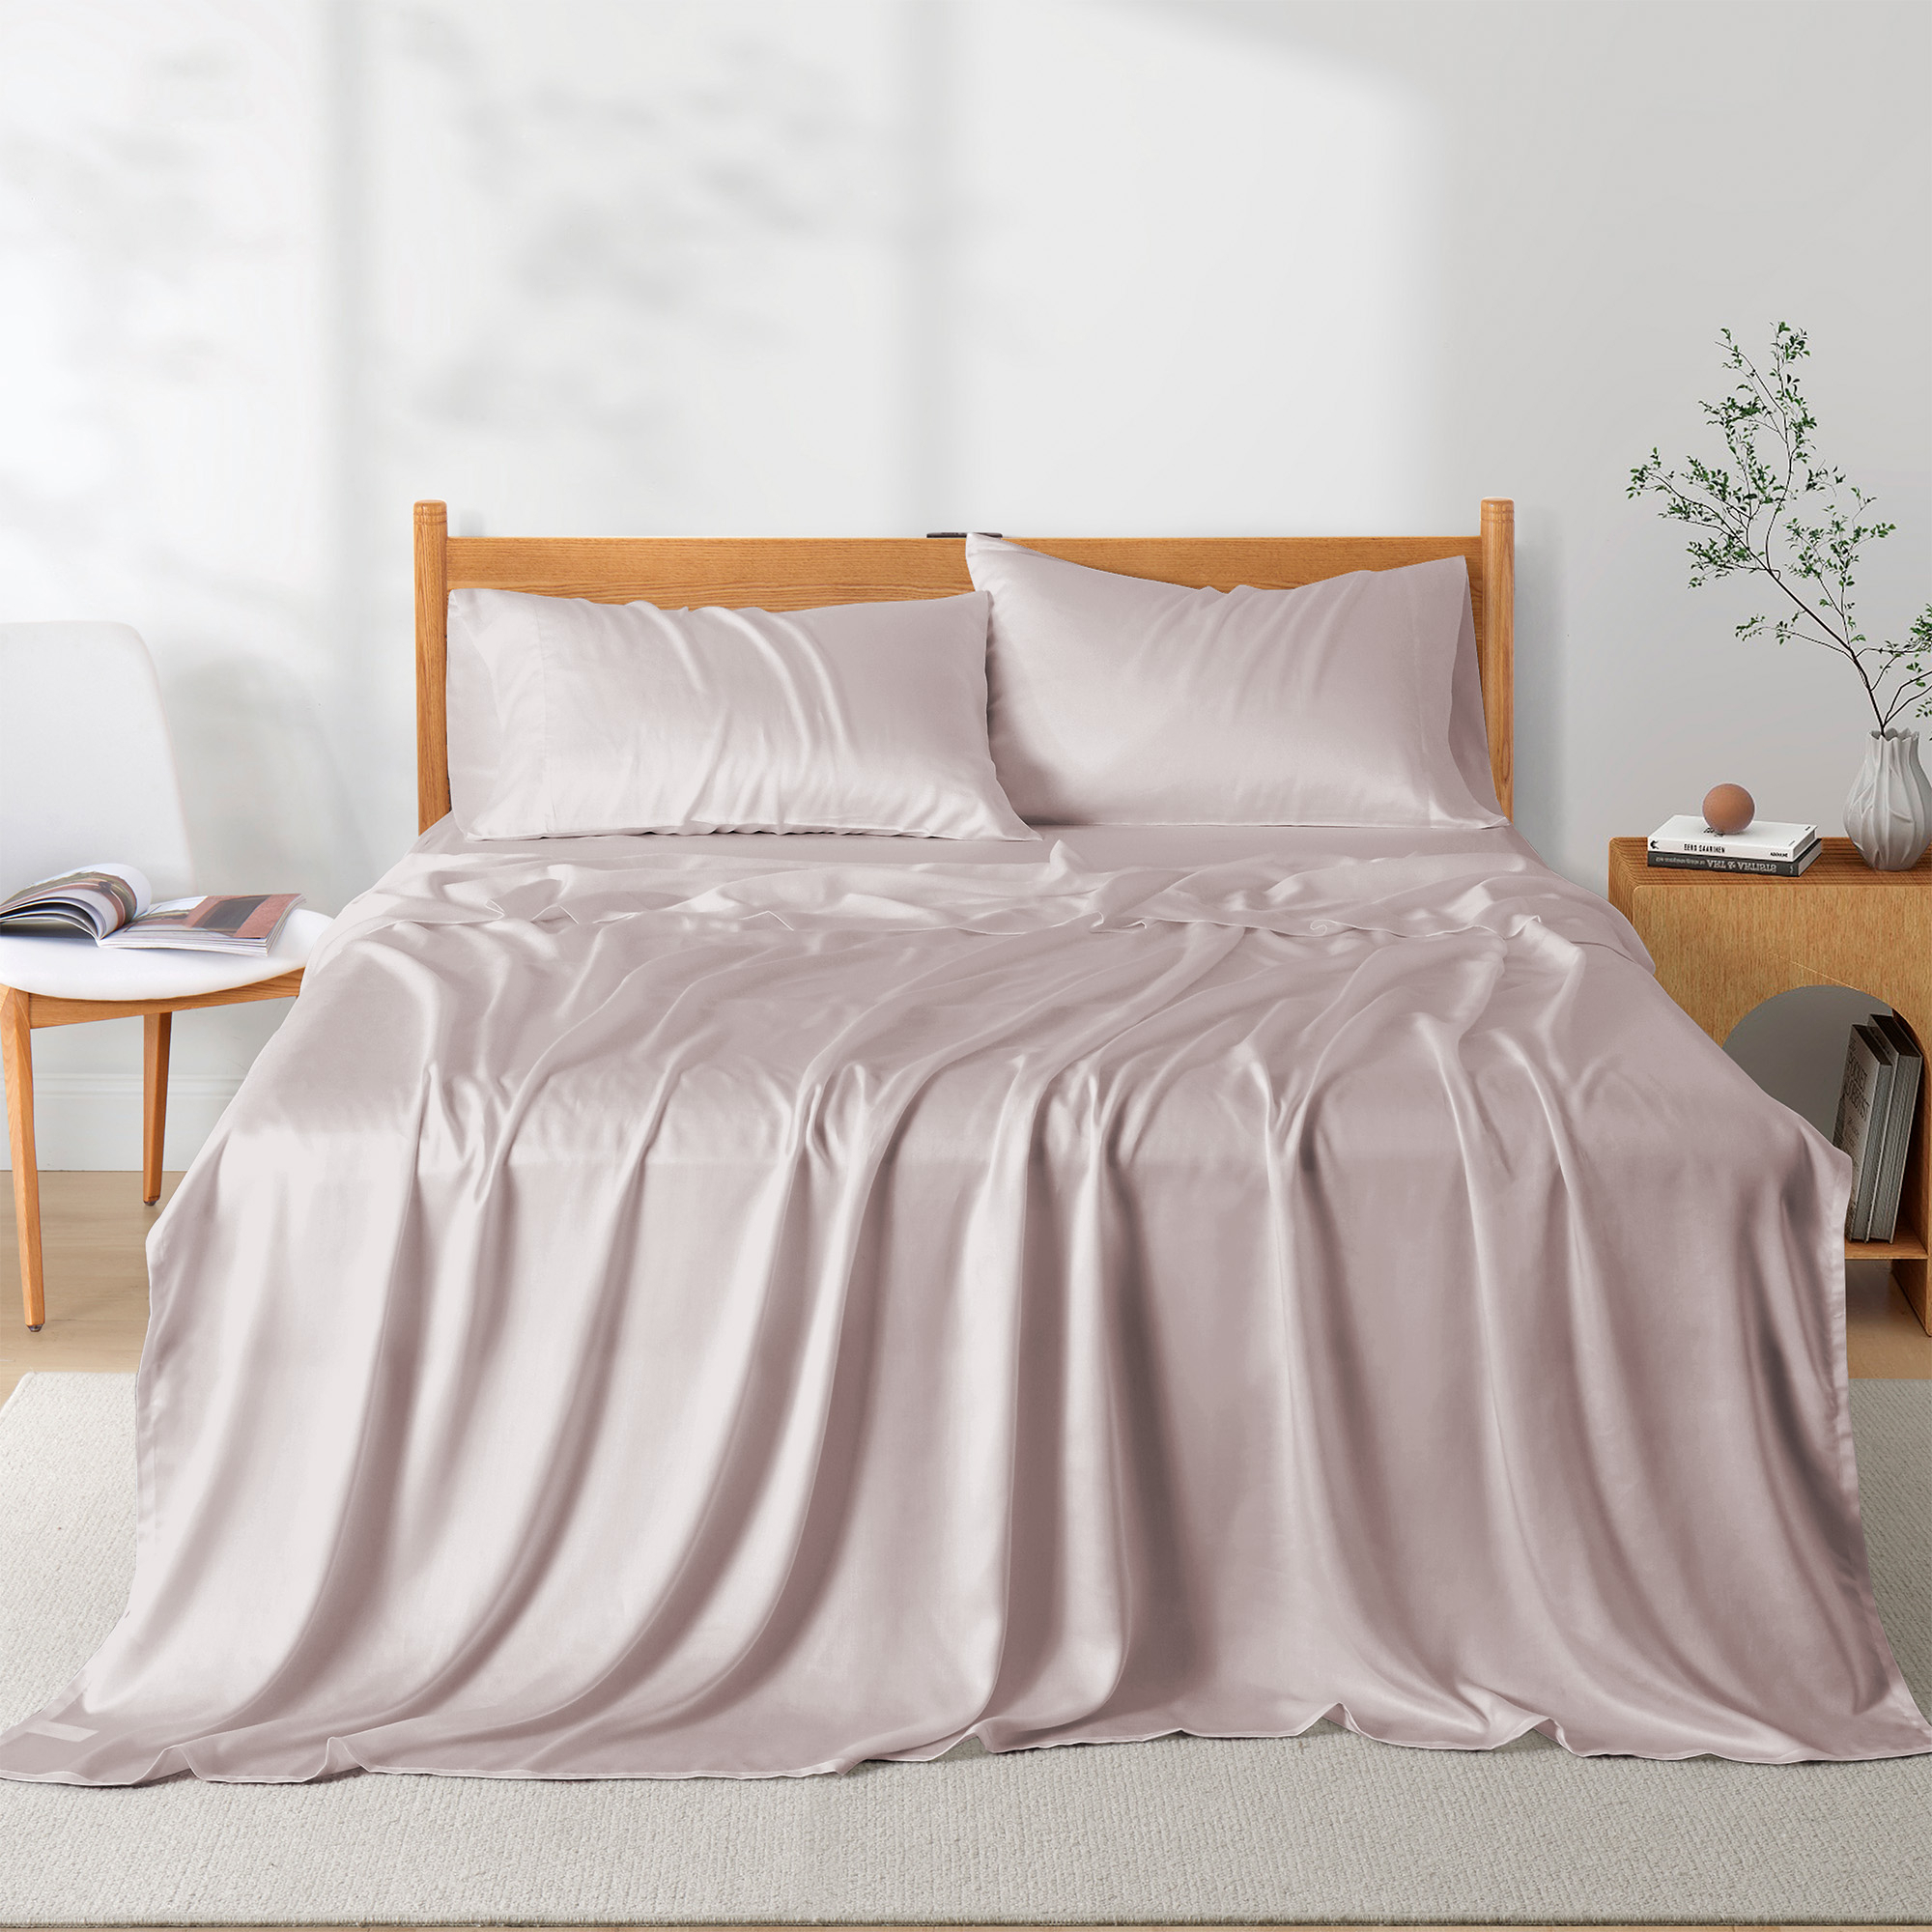 Tencel Lyocell Bed Sheets Silky Soft & Smooth Breathable Sheets, Luxury Hotel Bedding - Queen Size